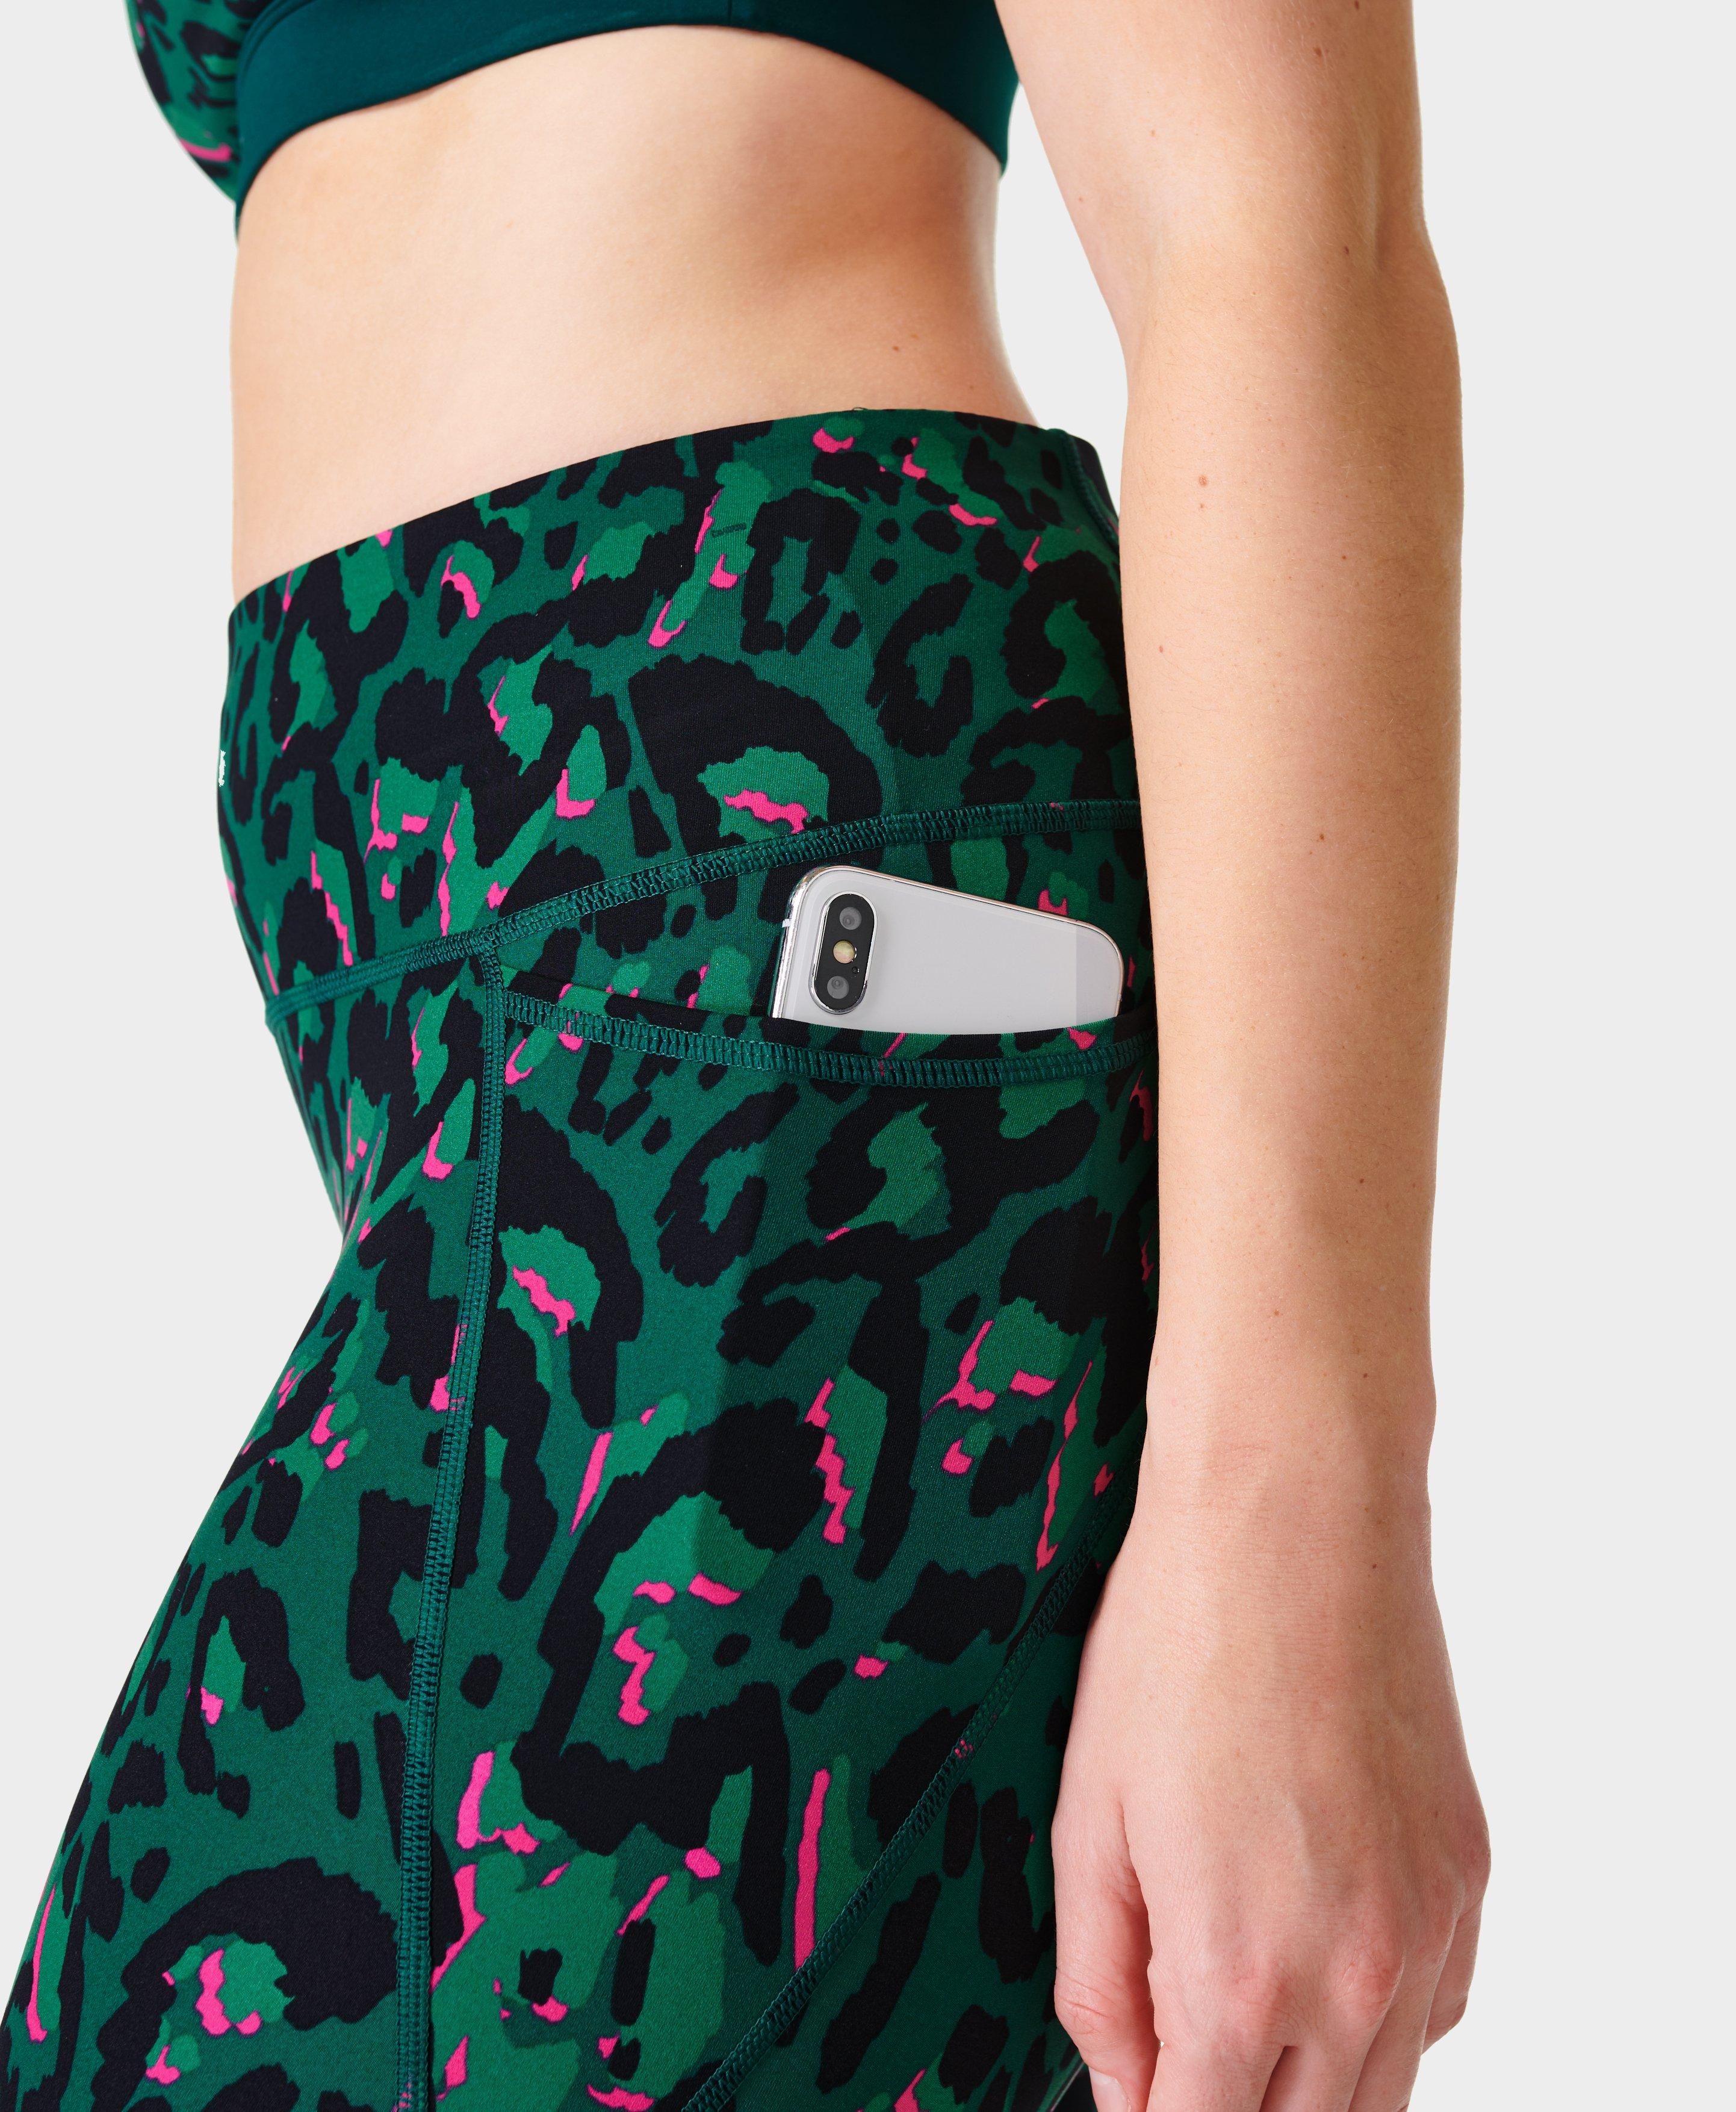 Sweaty Betty Power Gym Leggings, Green Brushed Leopard Print at